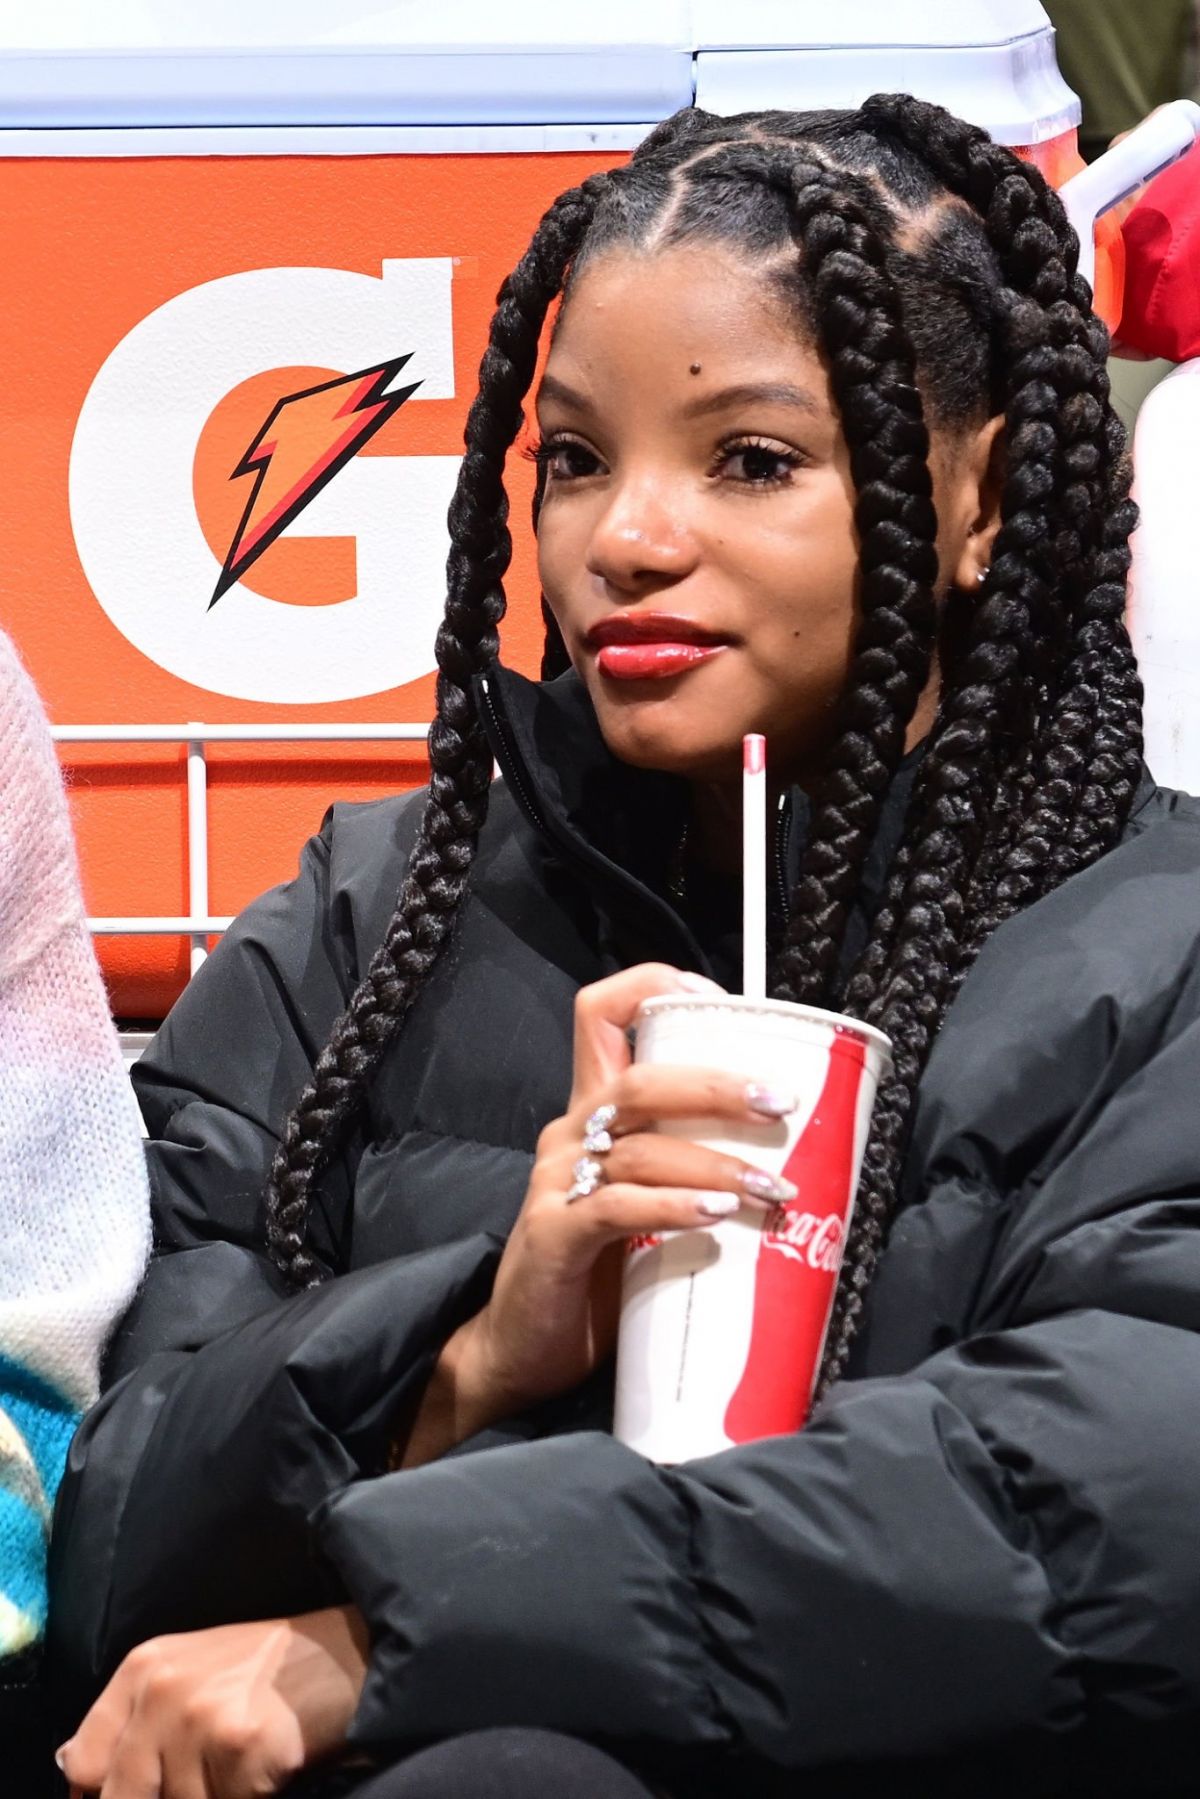 Halle Bailey in Black Puffer at Clippers vs Warriors Game LA